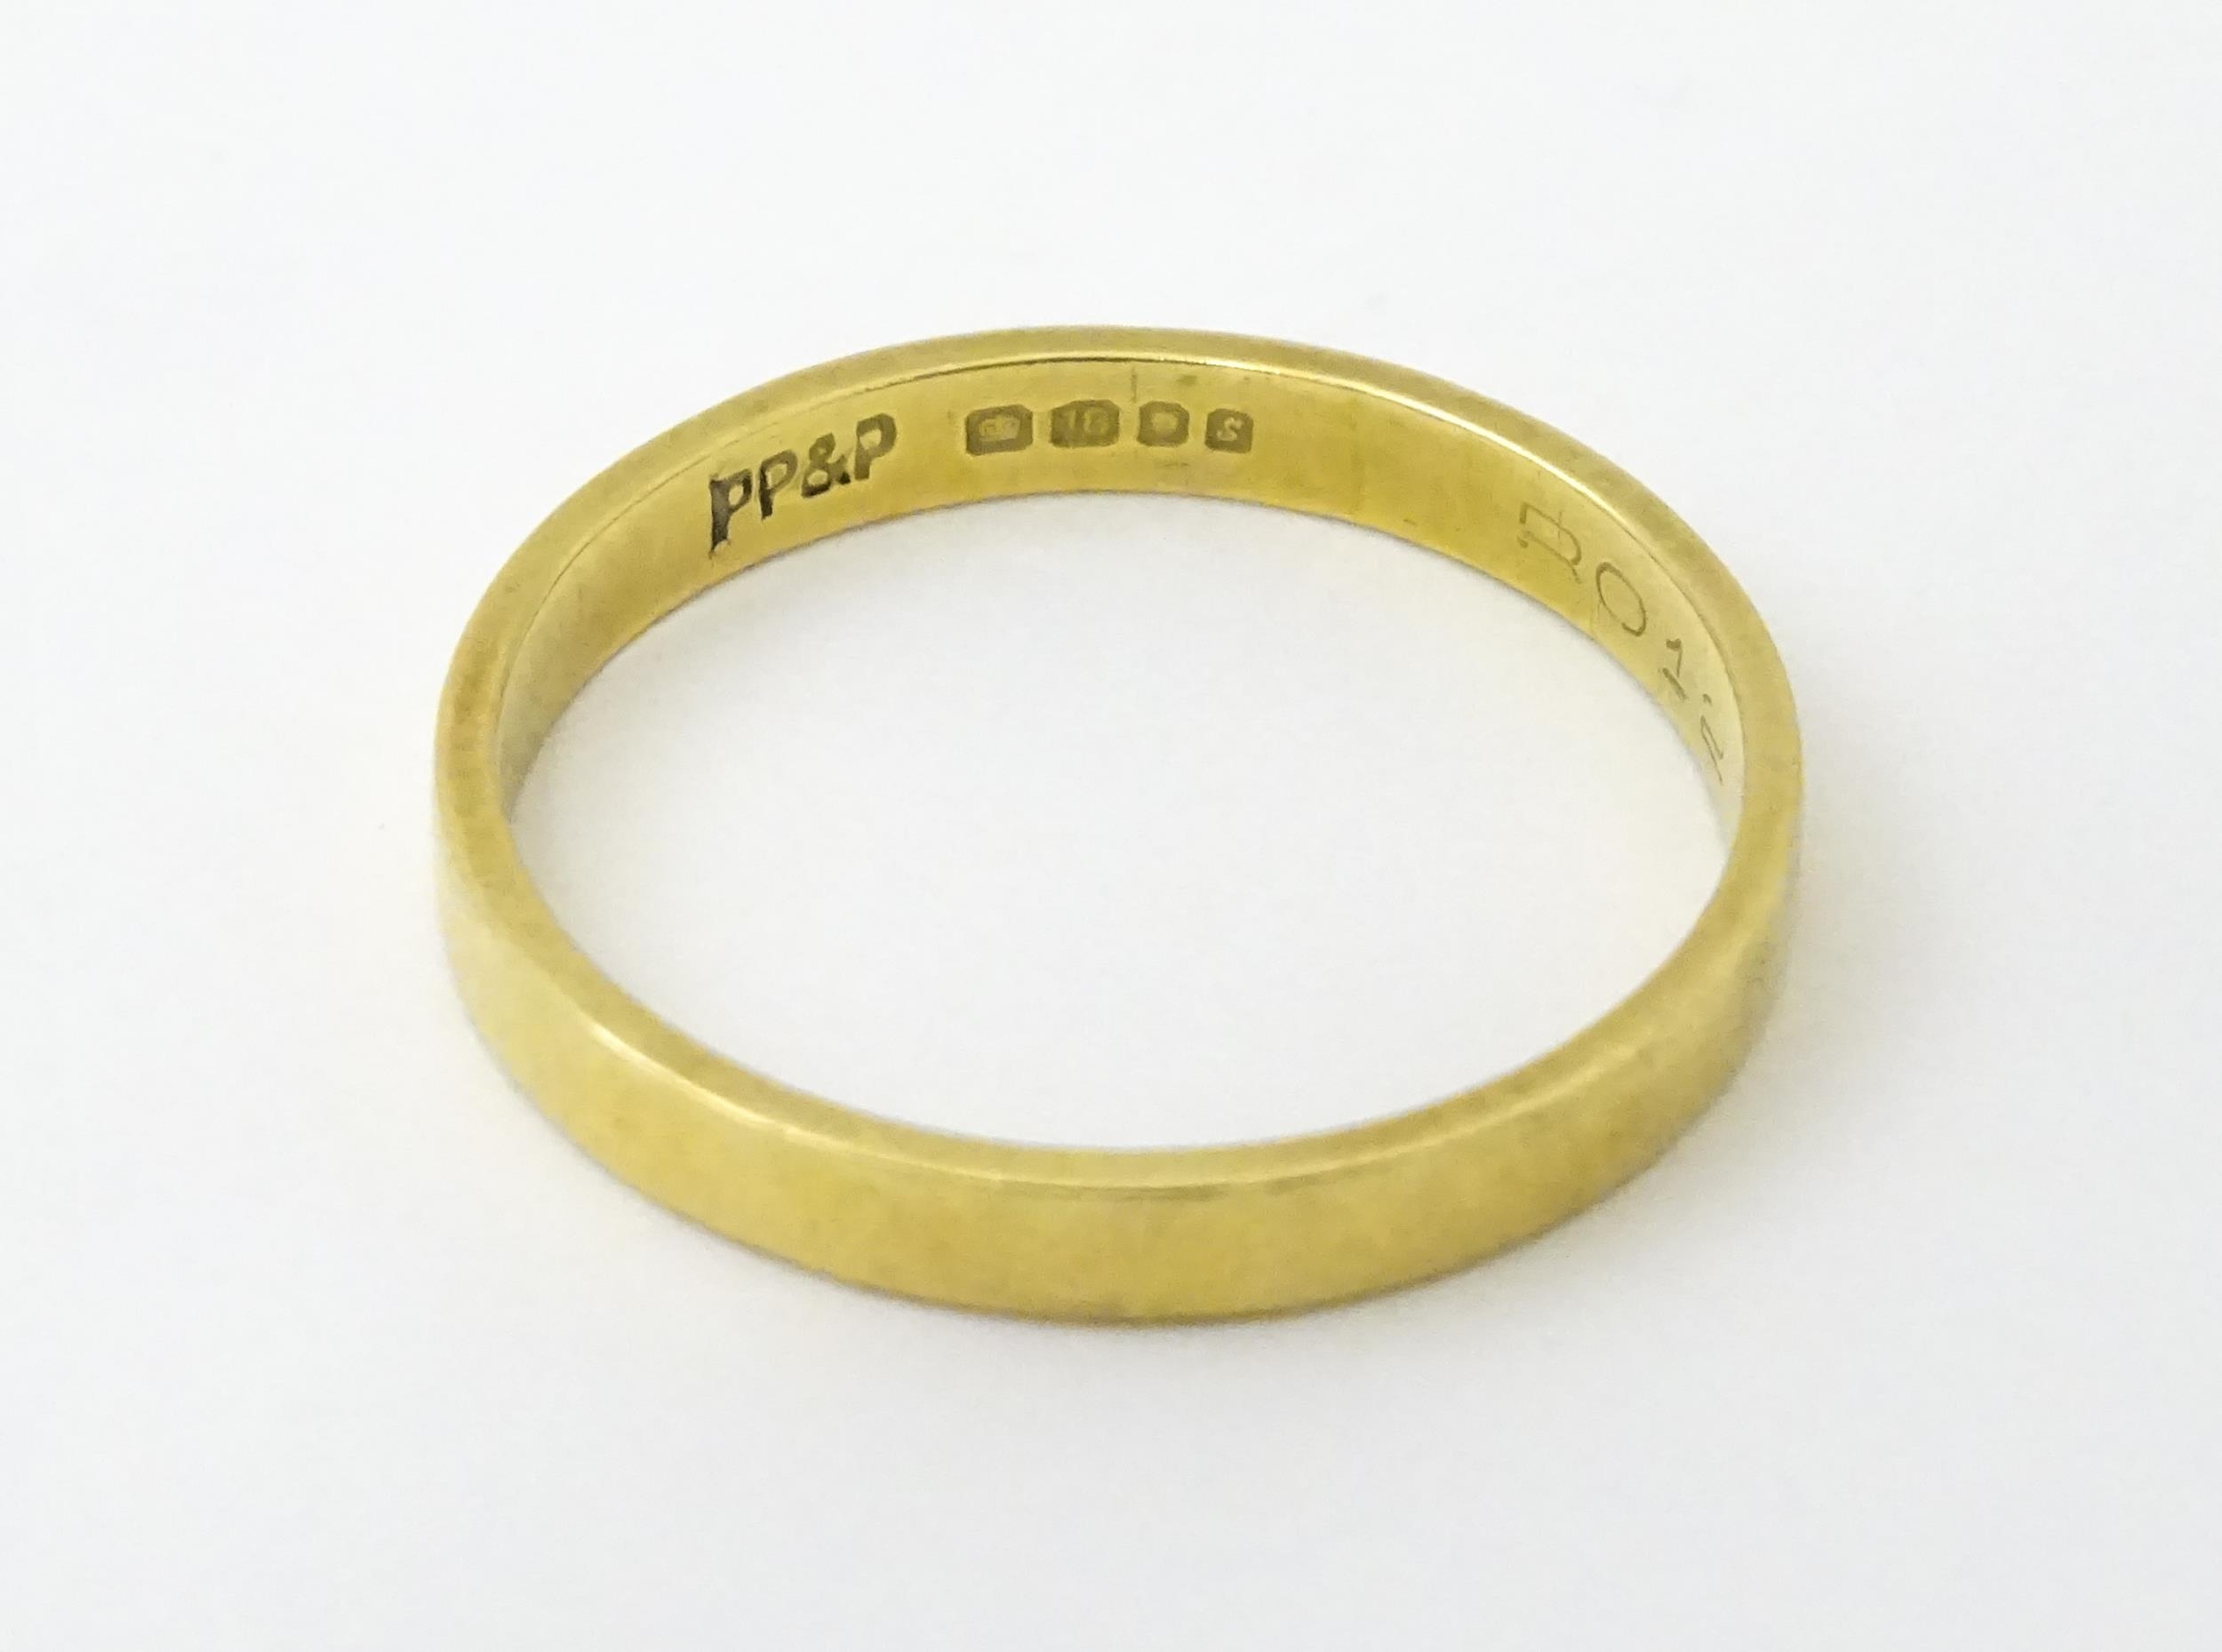 An 18ct gold ring / wedding band. Ring size approx. O Please Note - we do not make reference to